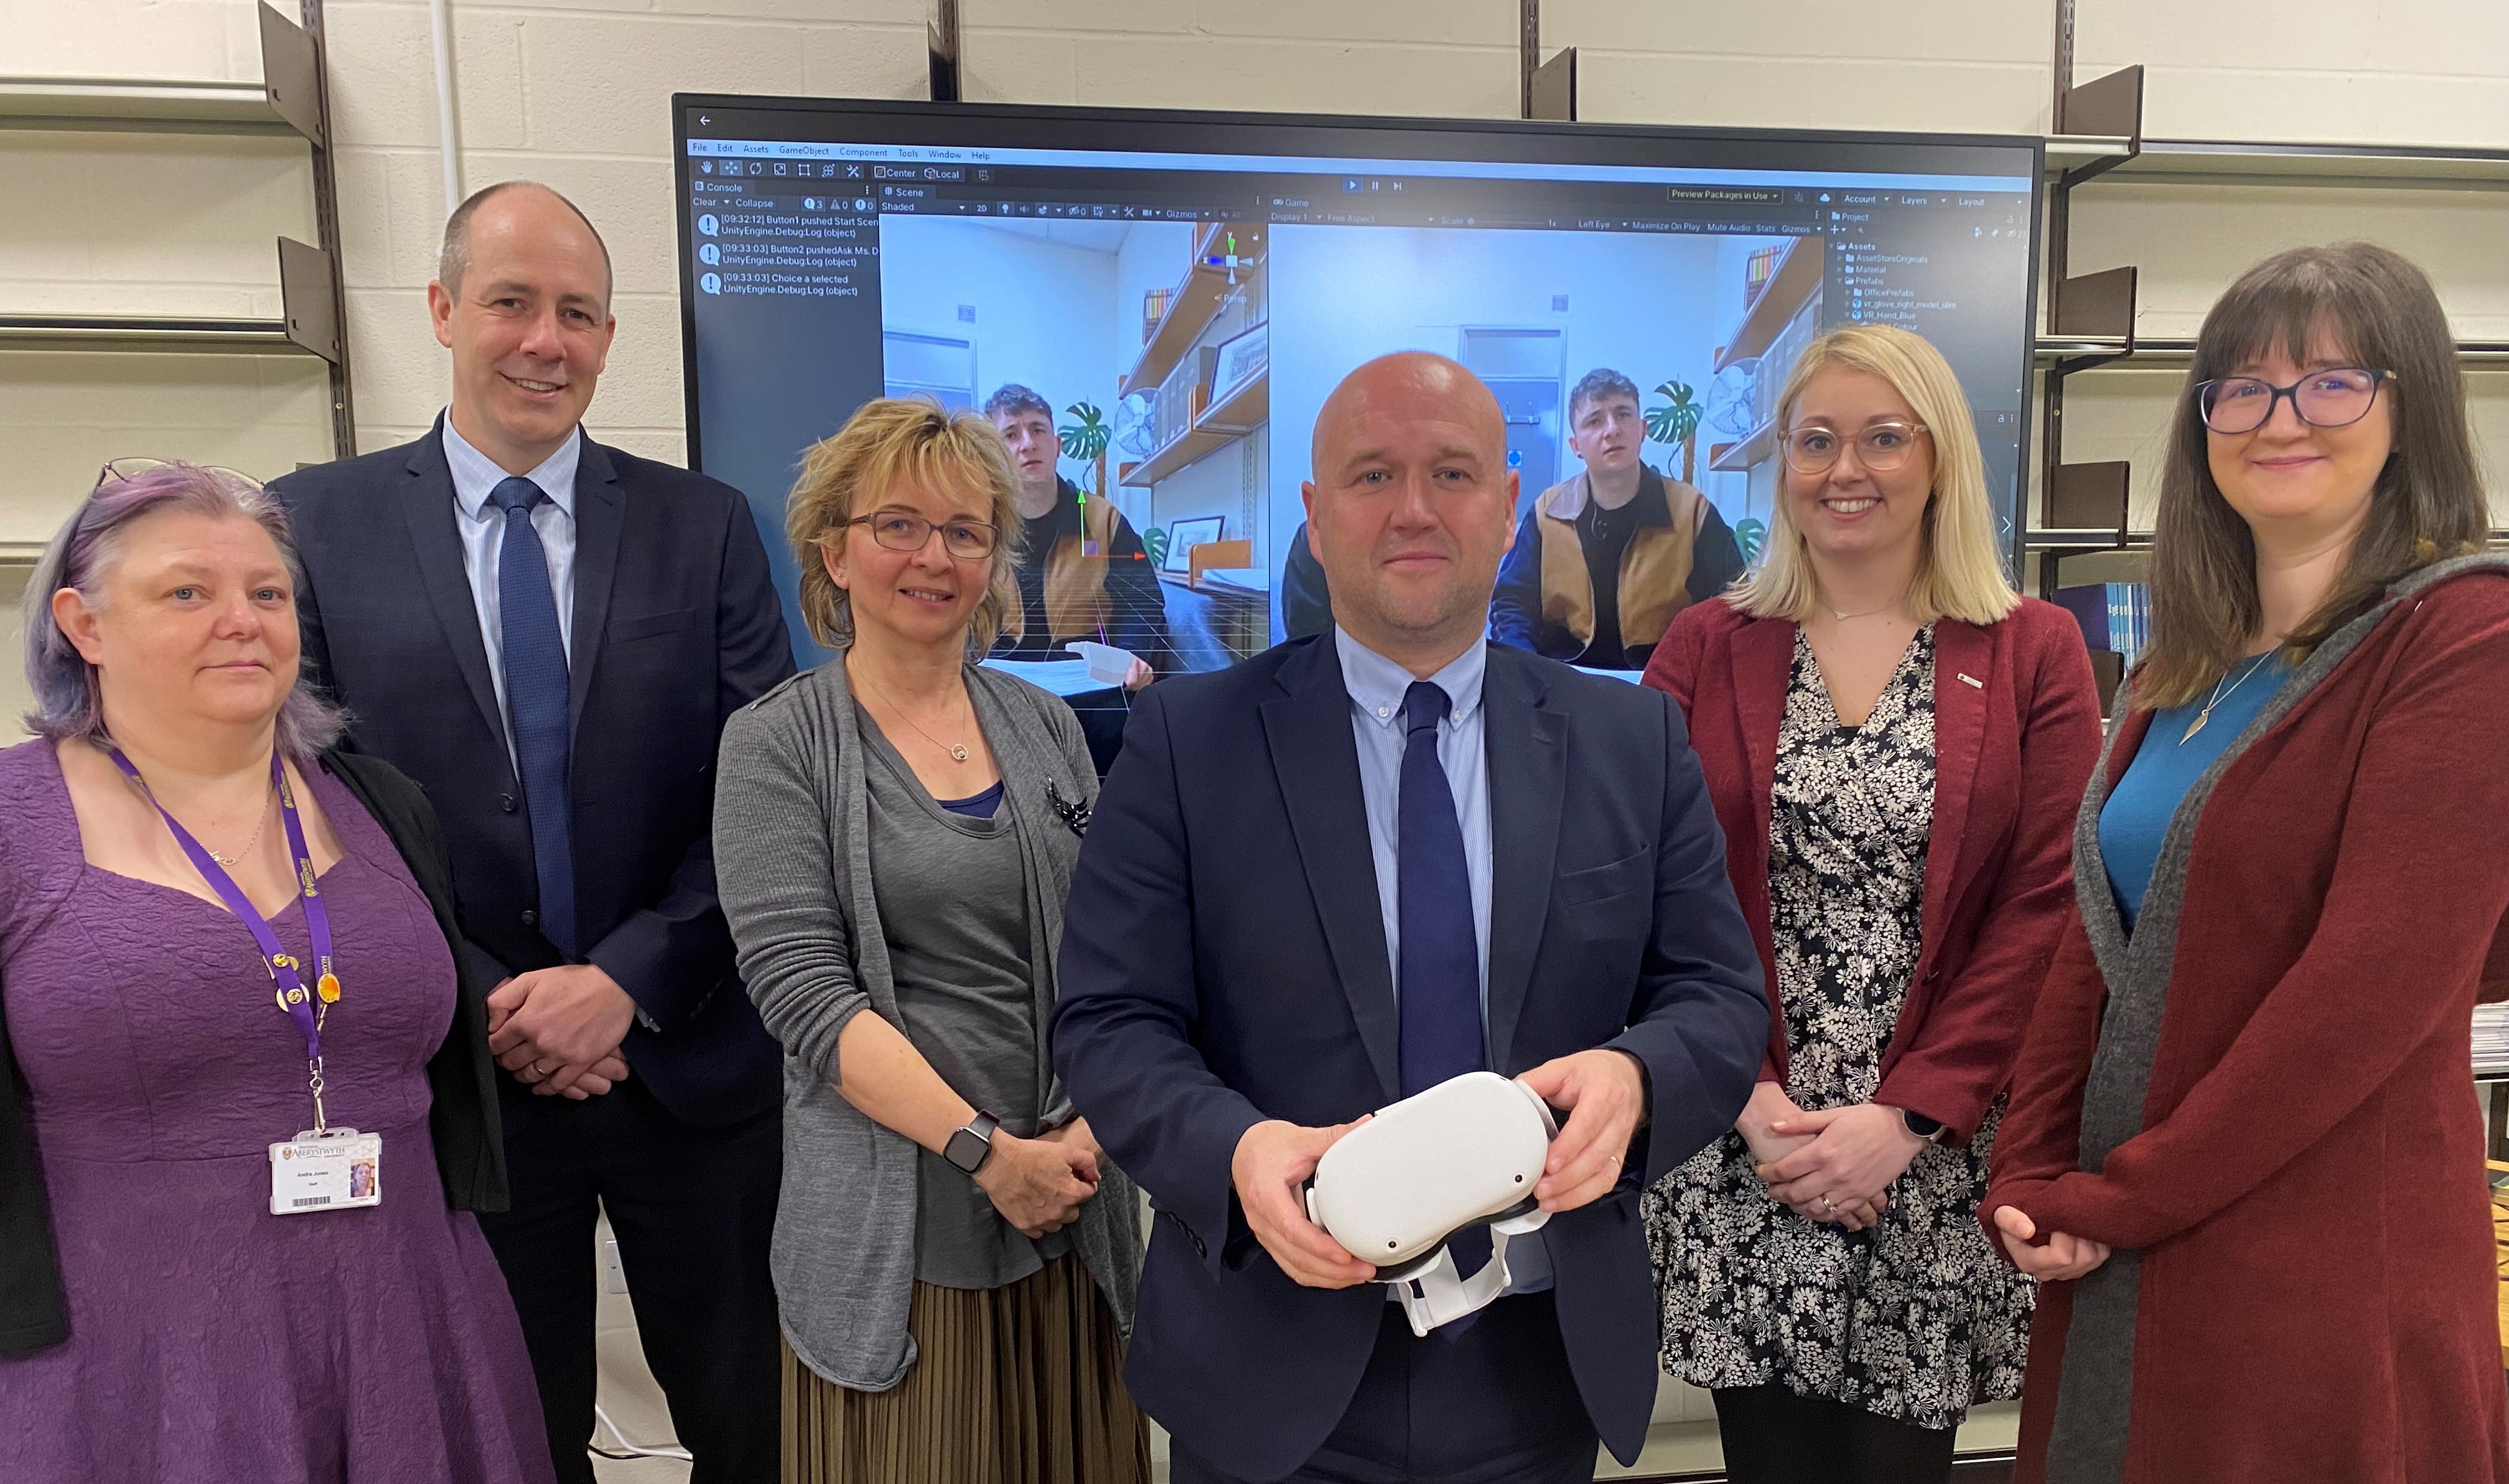 Left to right:  Andra Jones, Department of Computer Science at Aberystwyth University; Detective Chief Inspector Richard Yelland, Dyfed Powys Police; Sarah Wydall, Dewis Choice at Aberystwyth University;  Dafydd Llywelyn, Police and Crime Commissioner for Dyfed-Powys; Rebecca Zerk, Dewis Choice at Aberystwyth University; Dr Helen Miles, Department of Computer Science at Aberystwyth University.